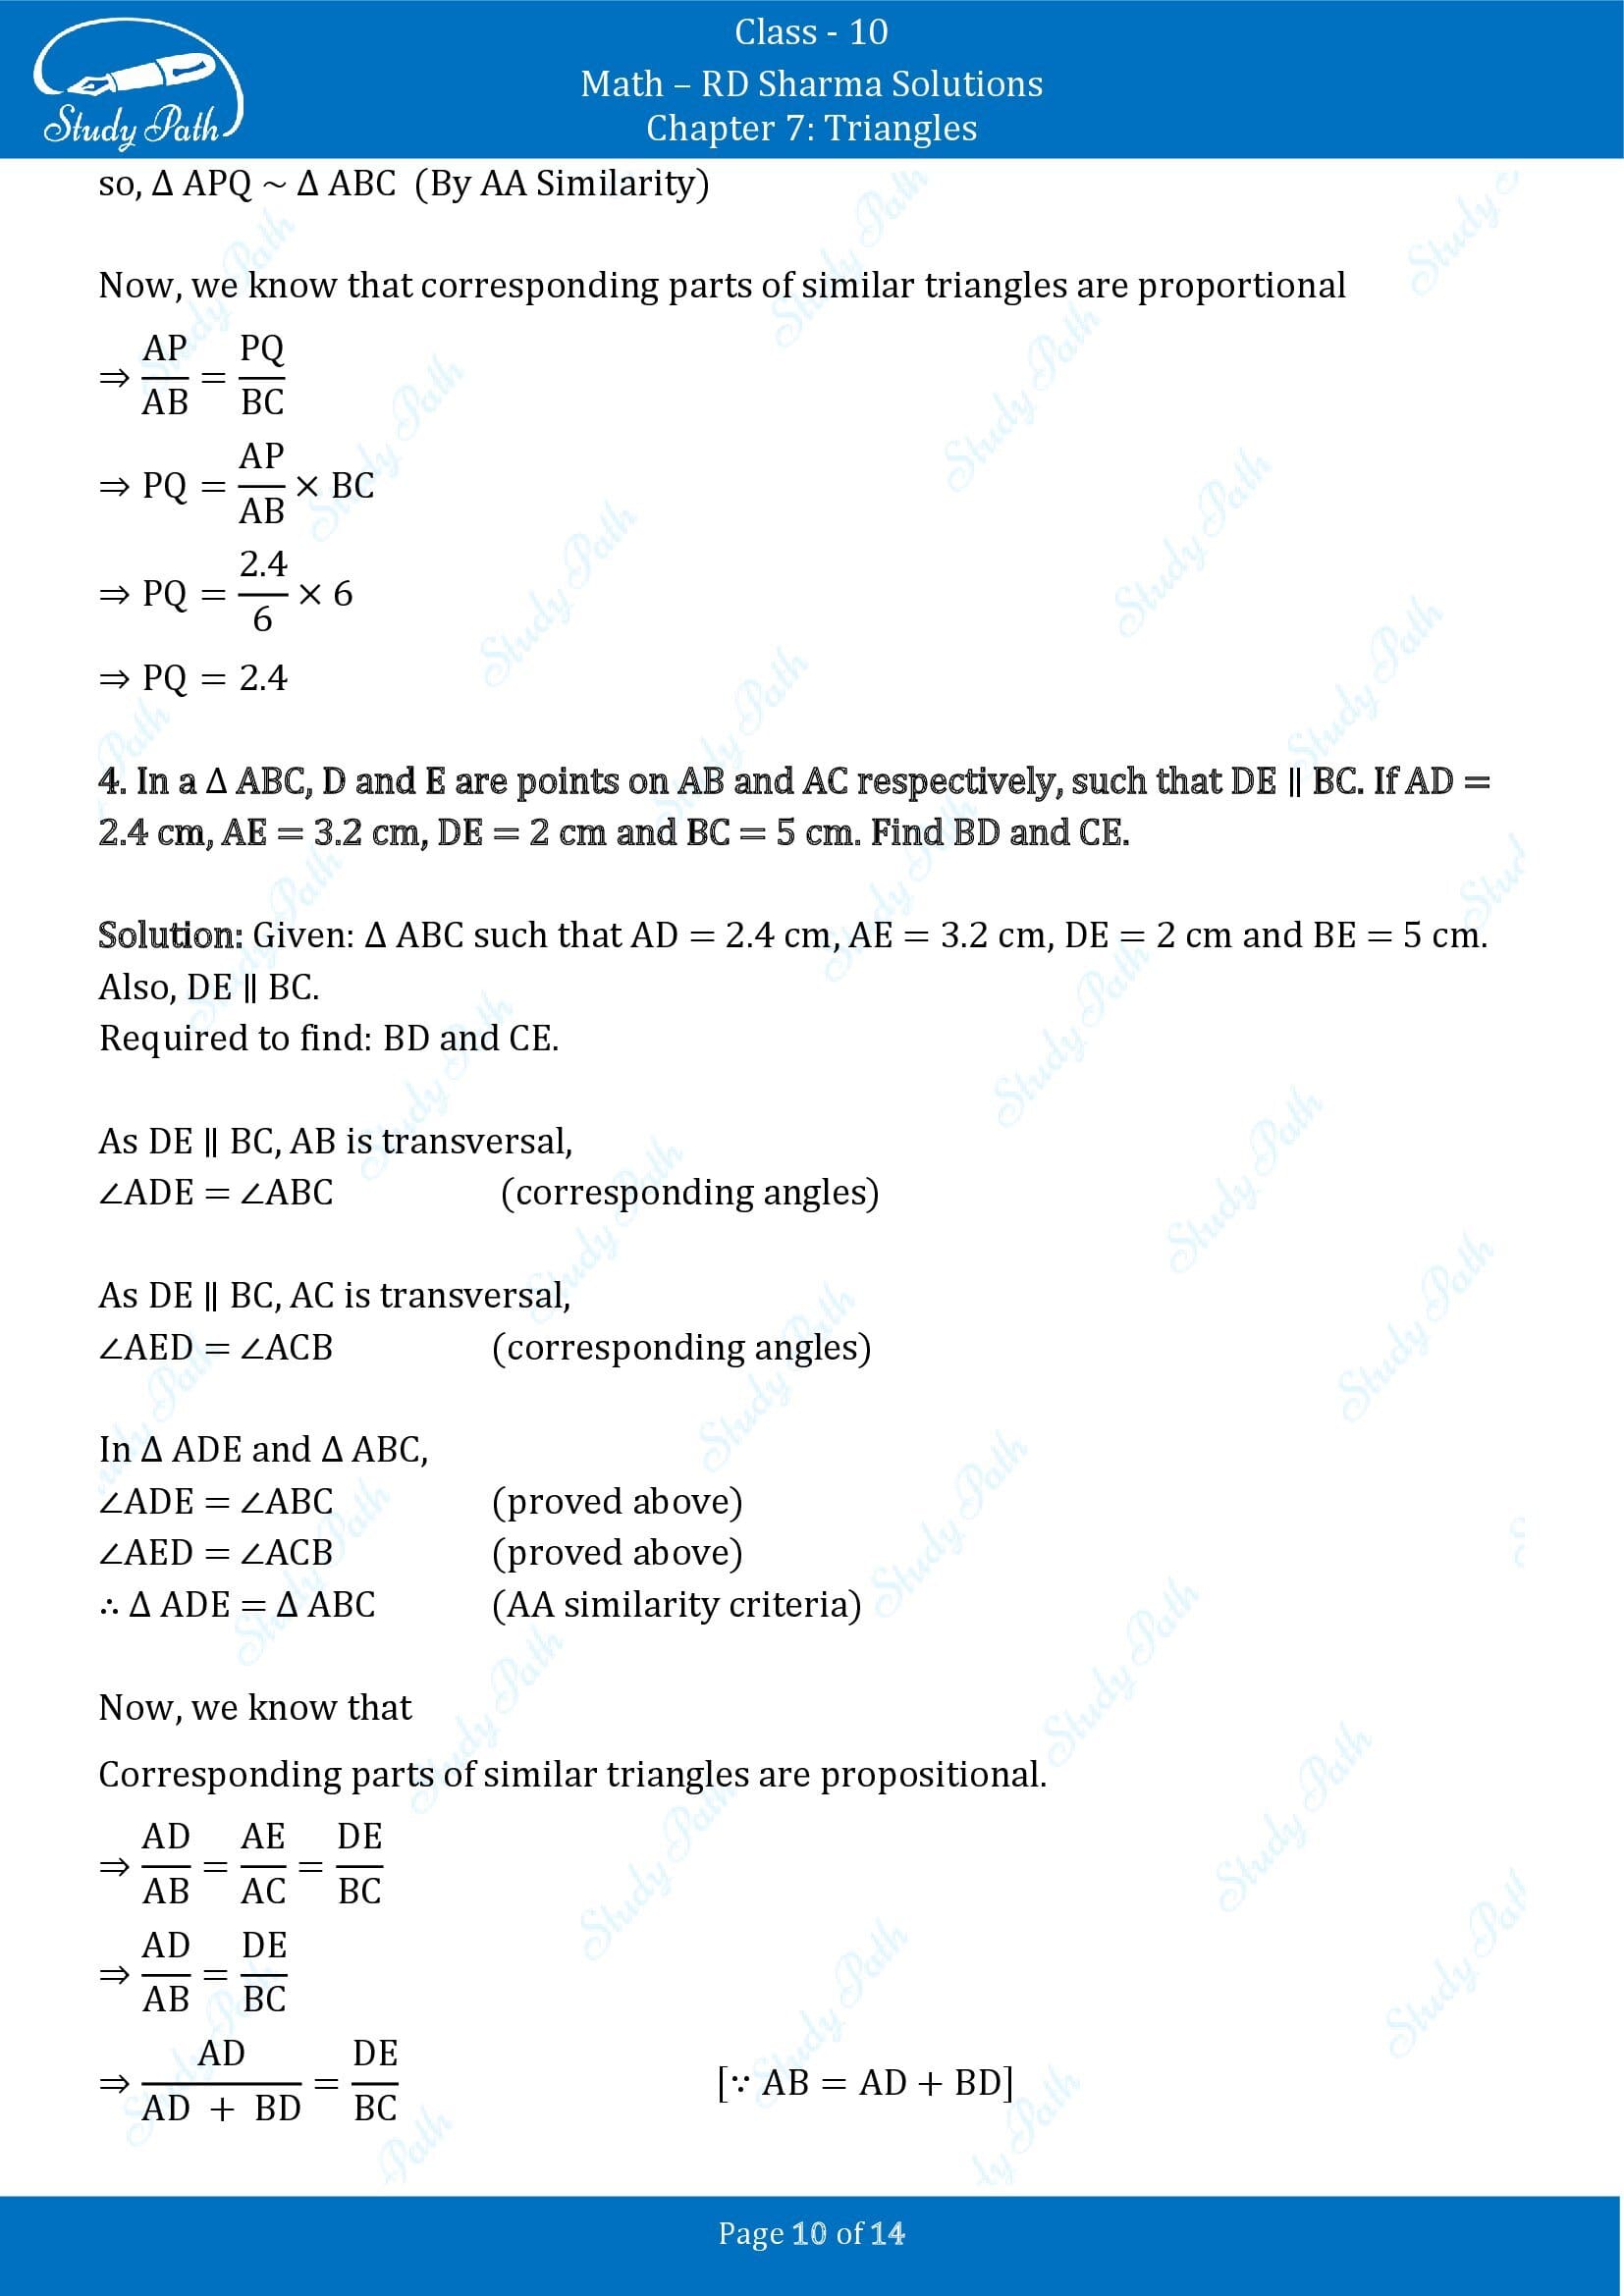 RD Sharma Solutions Class 10 Chapter 7 Triangles Exercise 7.2 00010